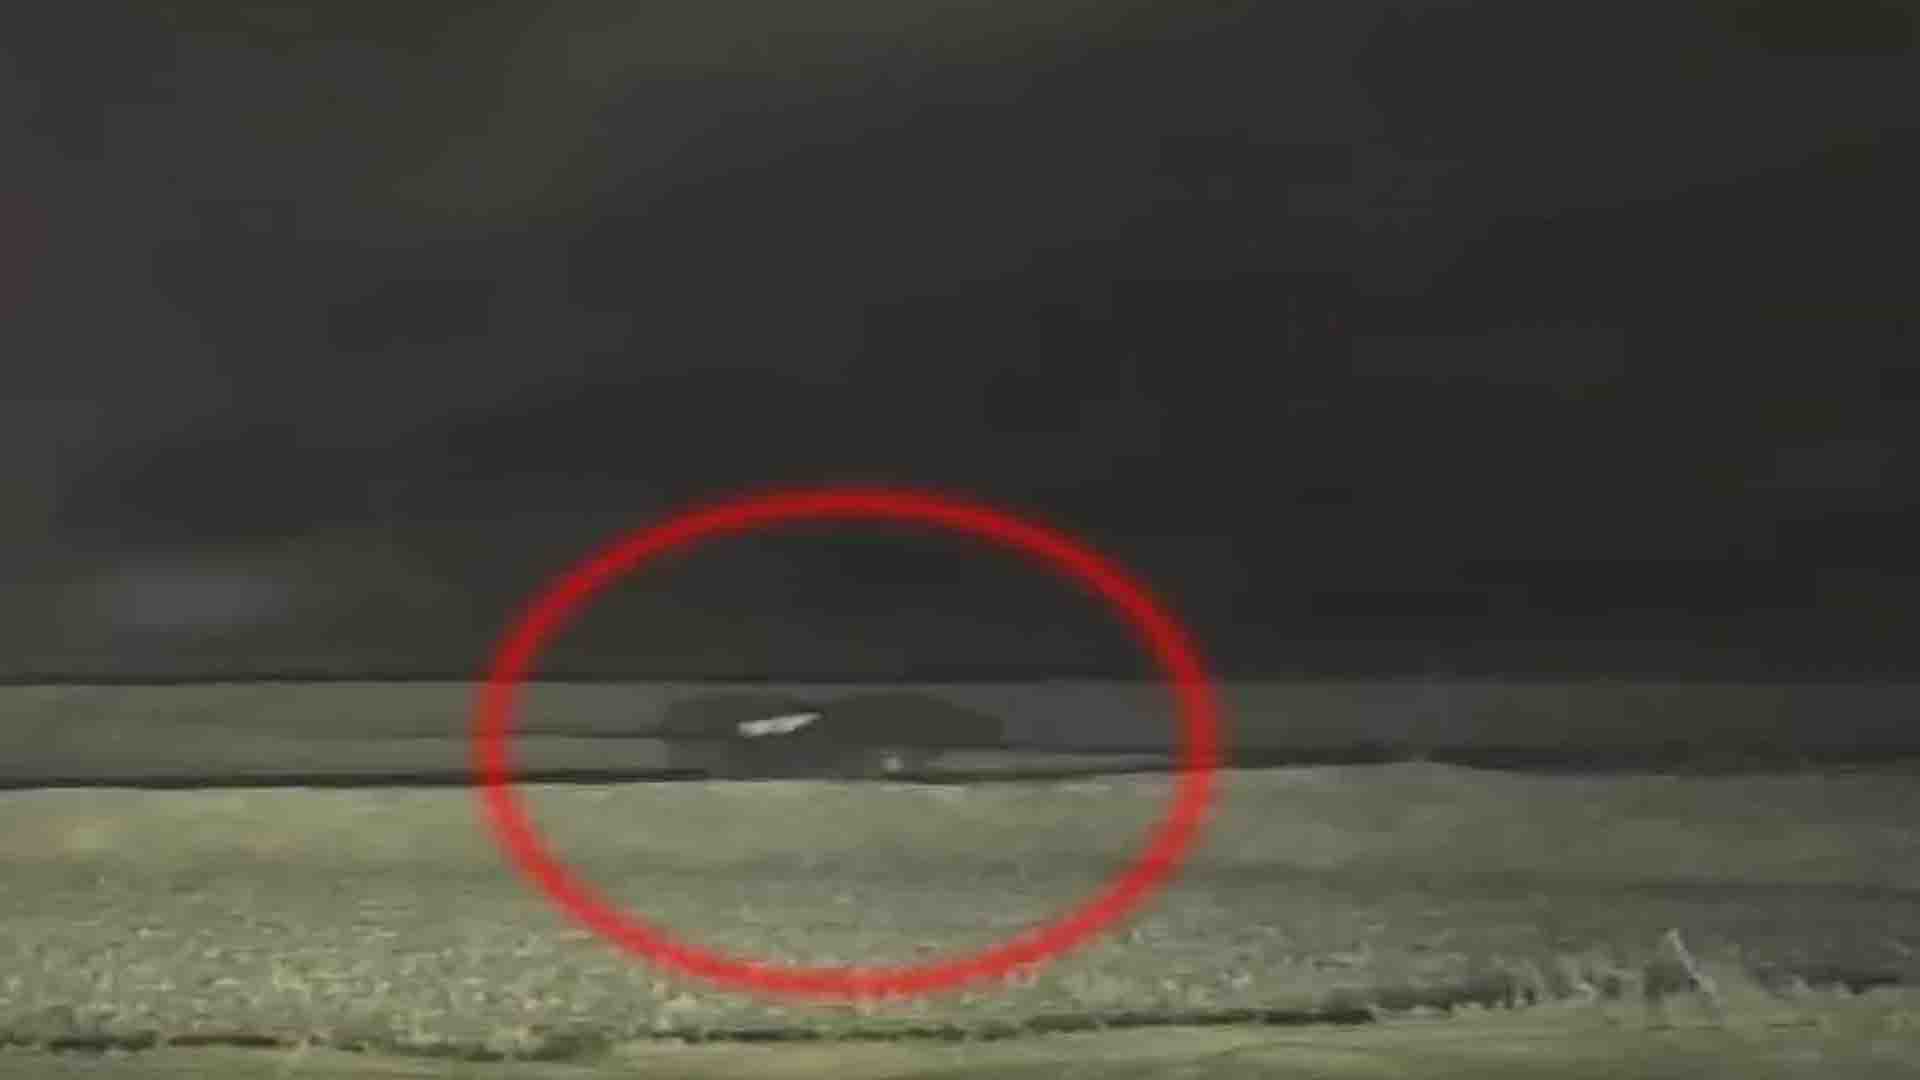 Bear and cub seen roaming in the fields, watch video